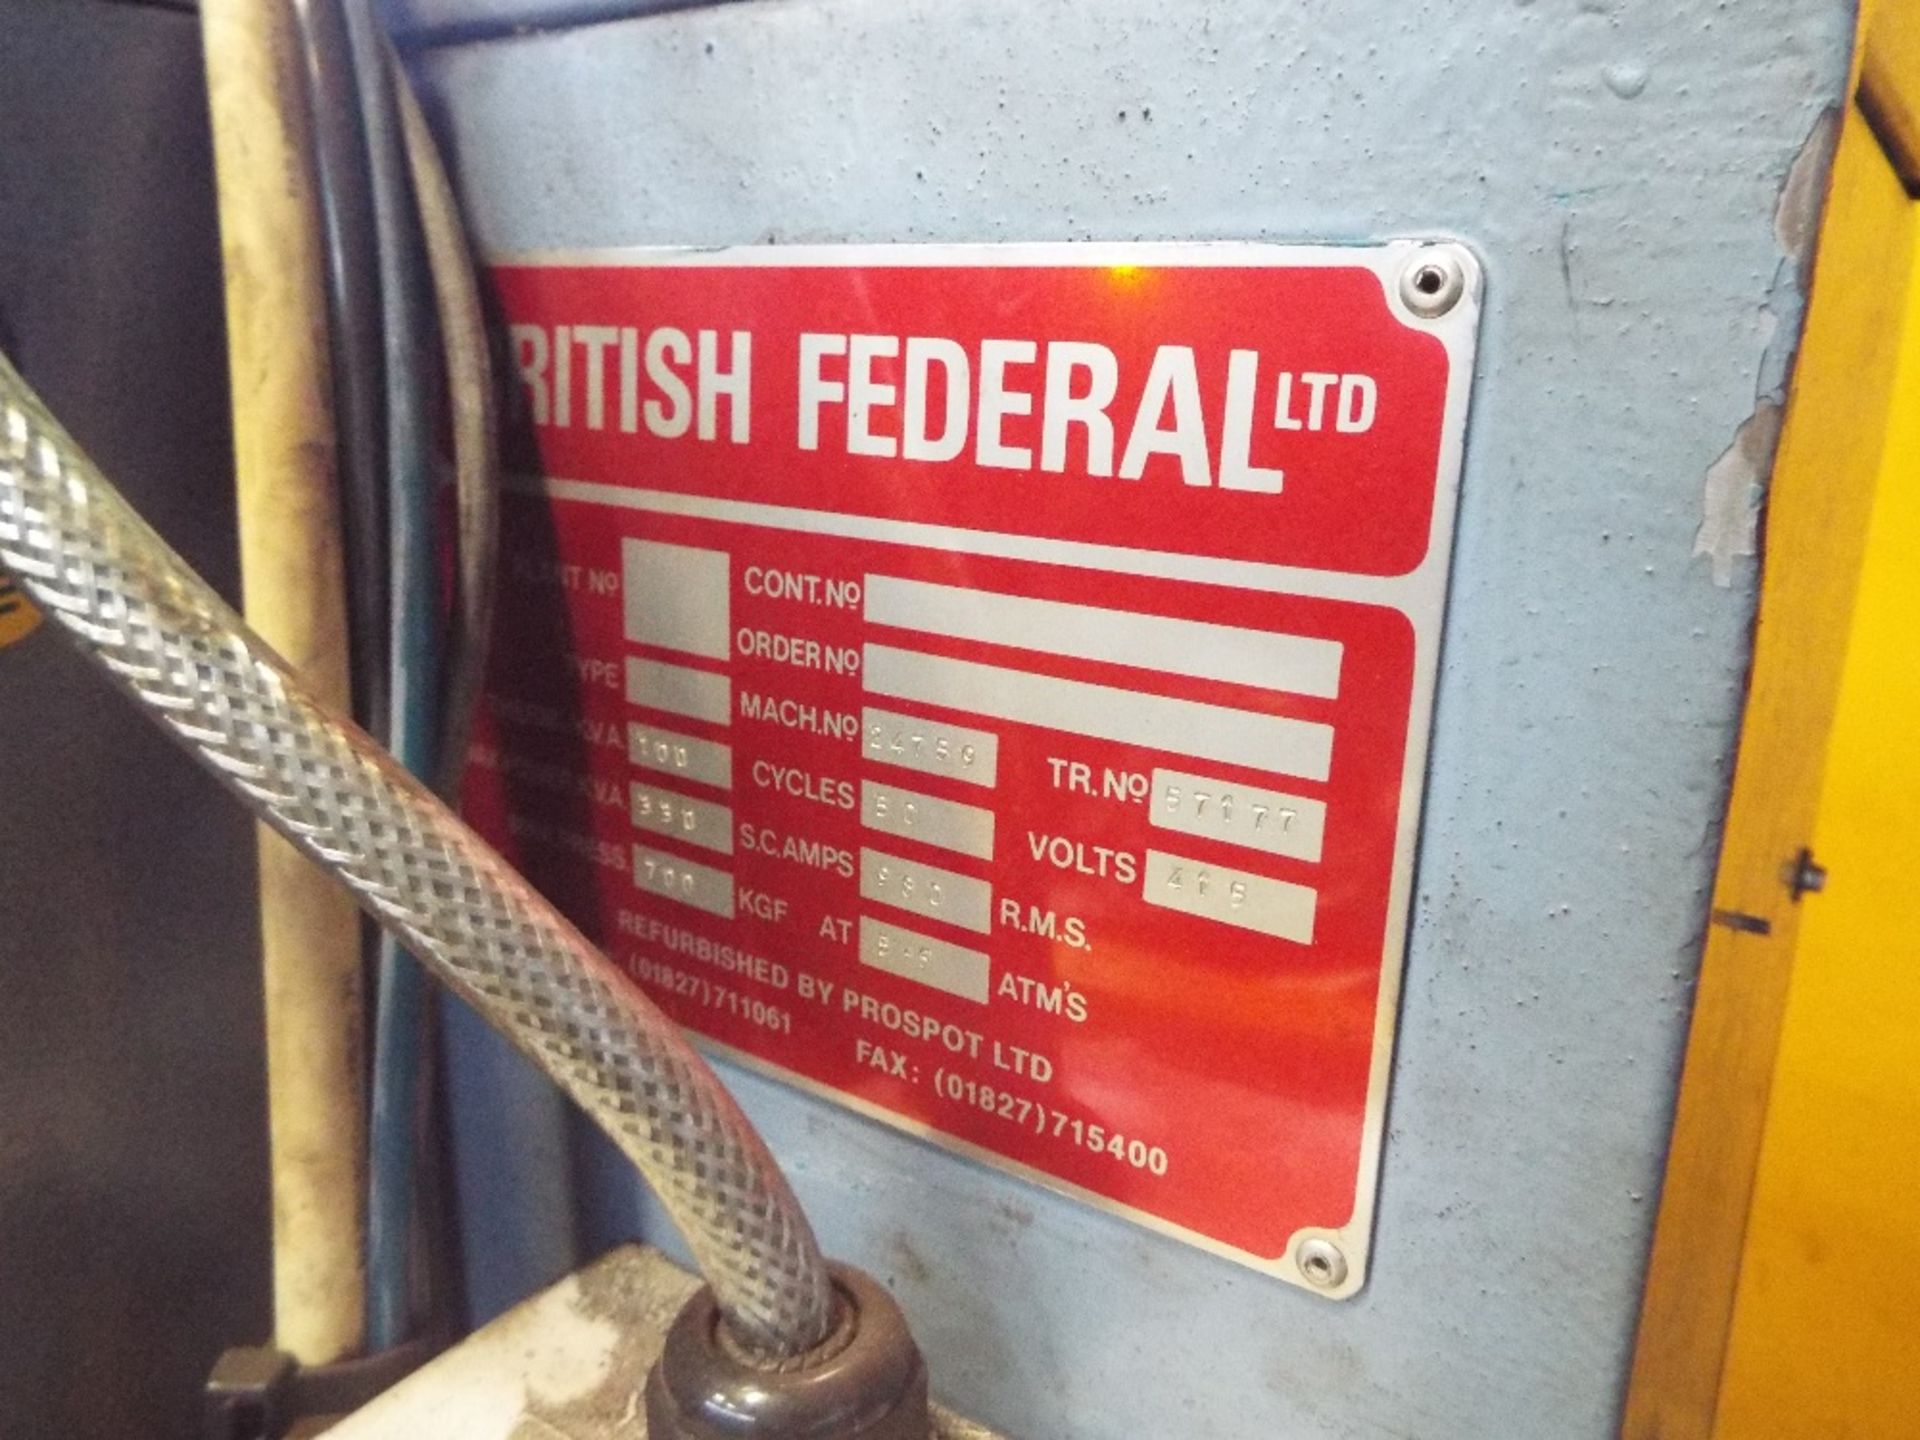 British Federal Projection Welding Rig - Image 2 of 4